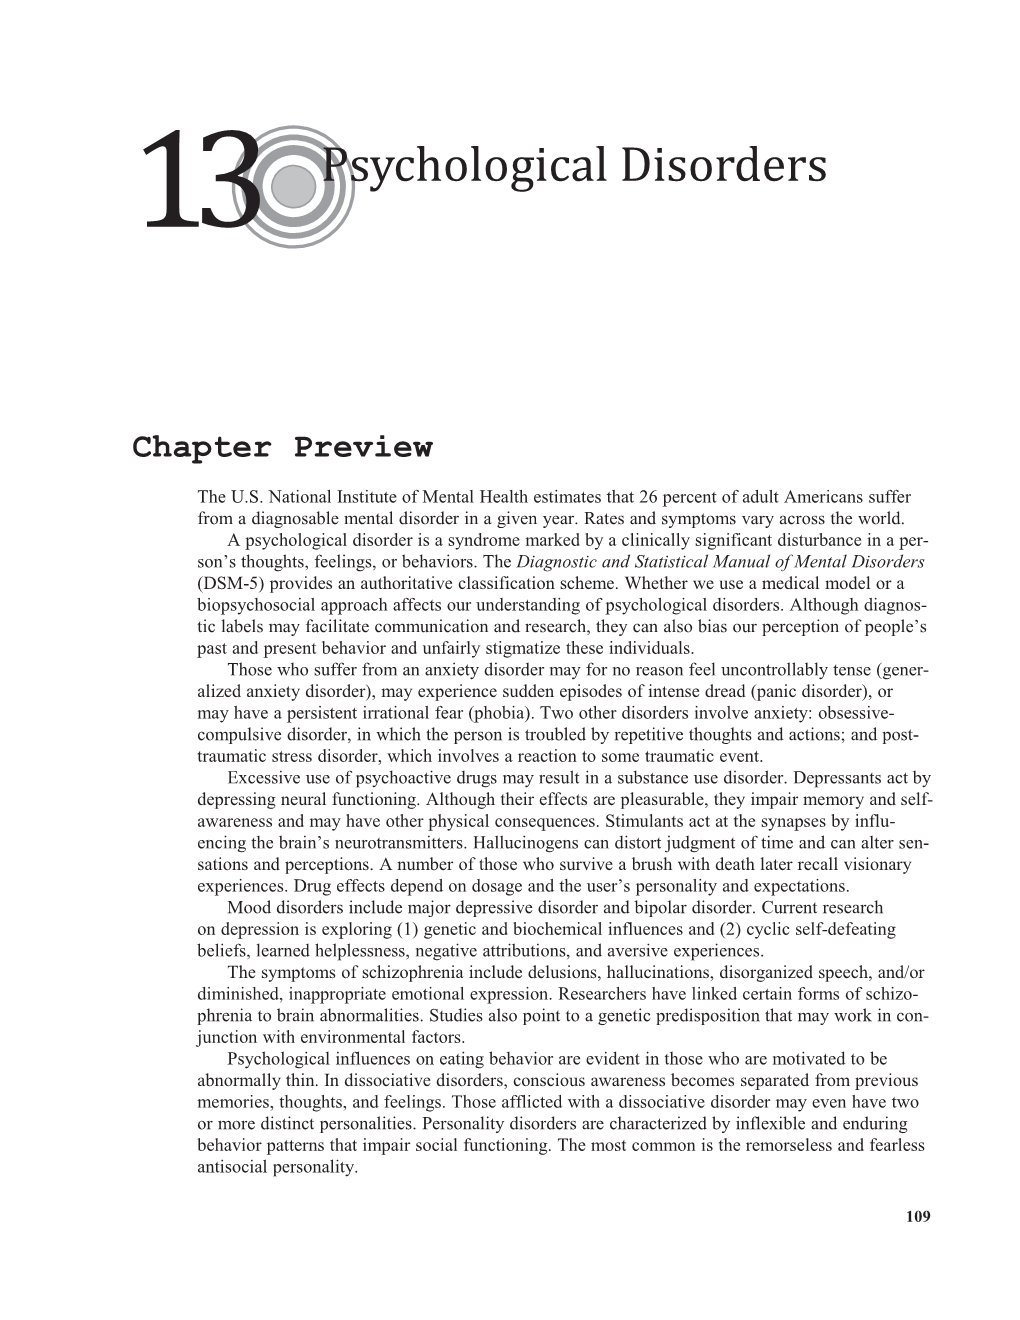 13 Psychological Disorders